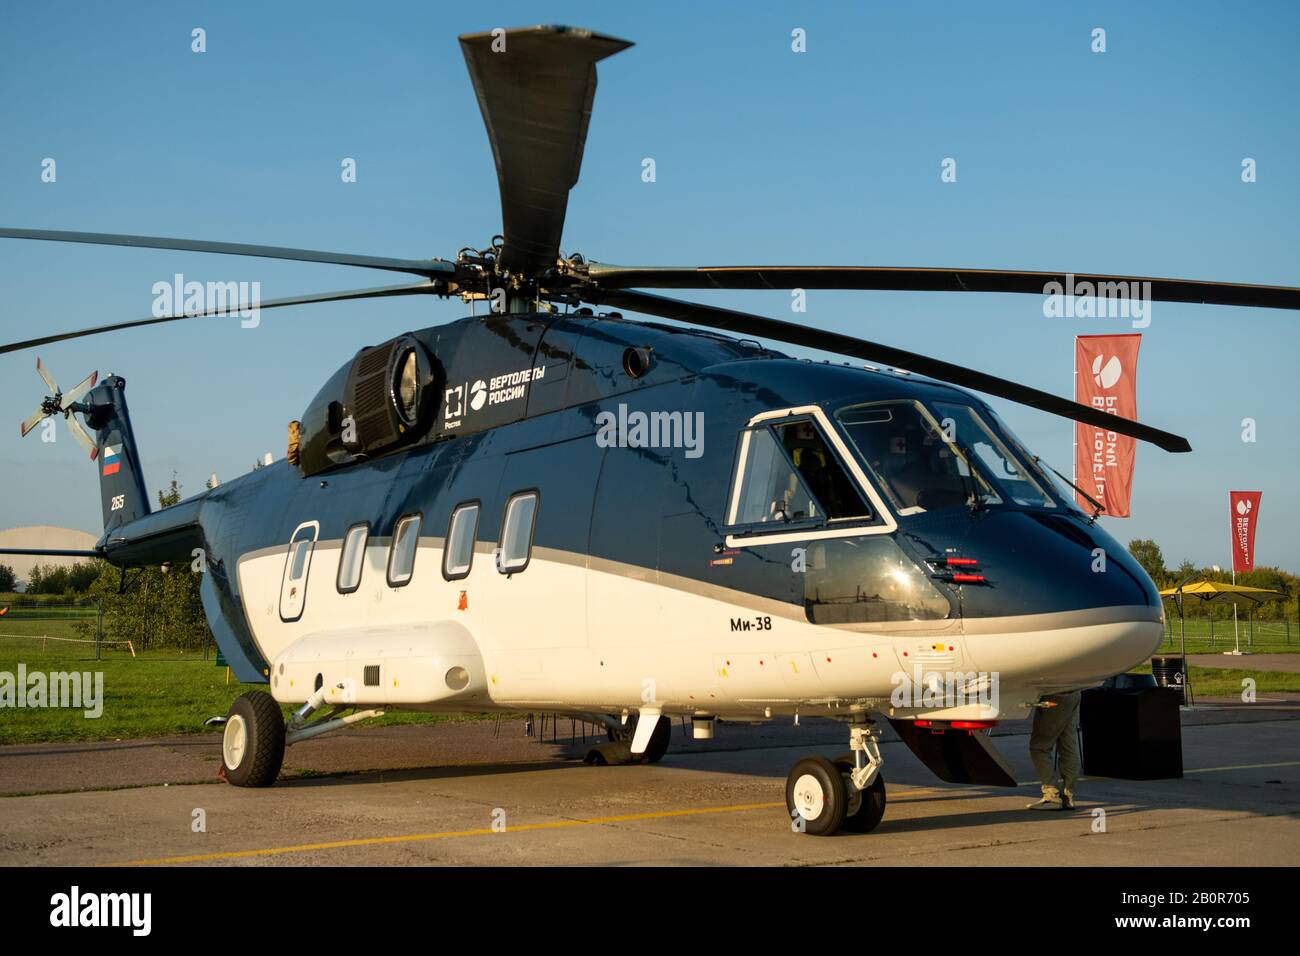 August 30, 2019. Zhukovsky, Russia. Russian medium multi-purpose helicopter Mil Mi-38 at the International Aviation and Space Salon MAKS 2019. Stock Photo